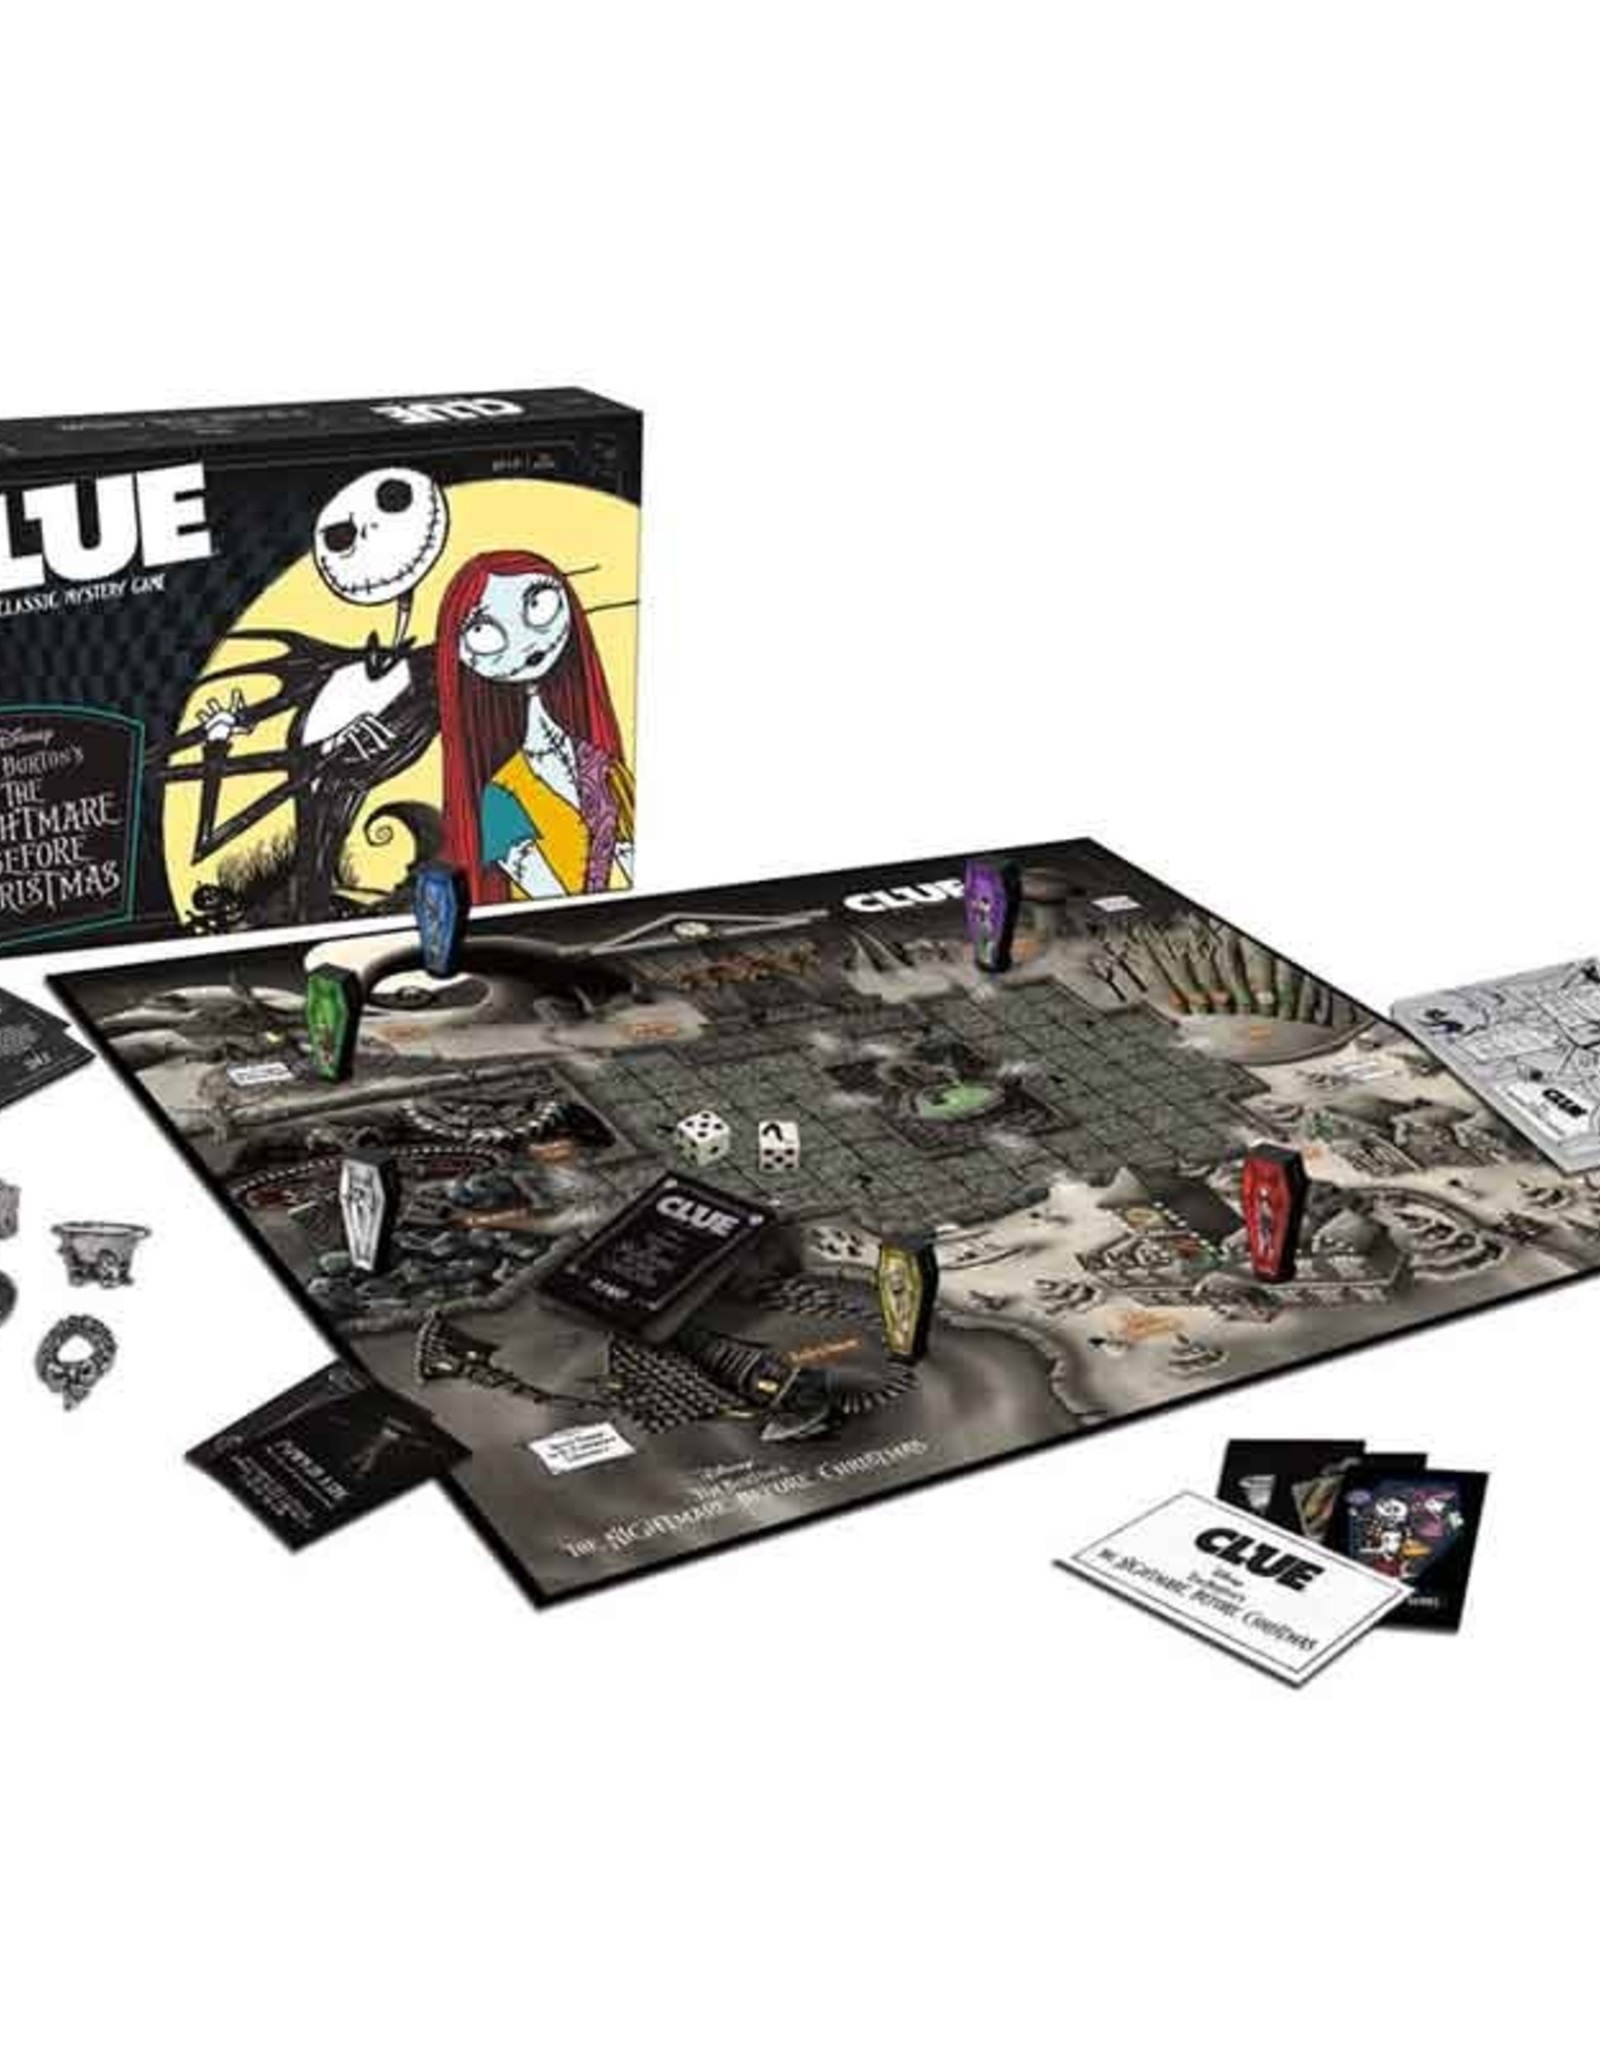 USAopoly Clue Nightmare Before Christmas